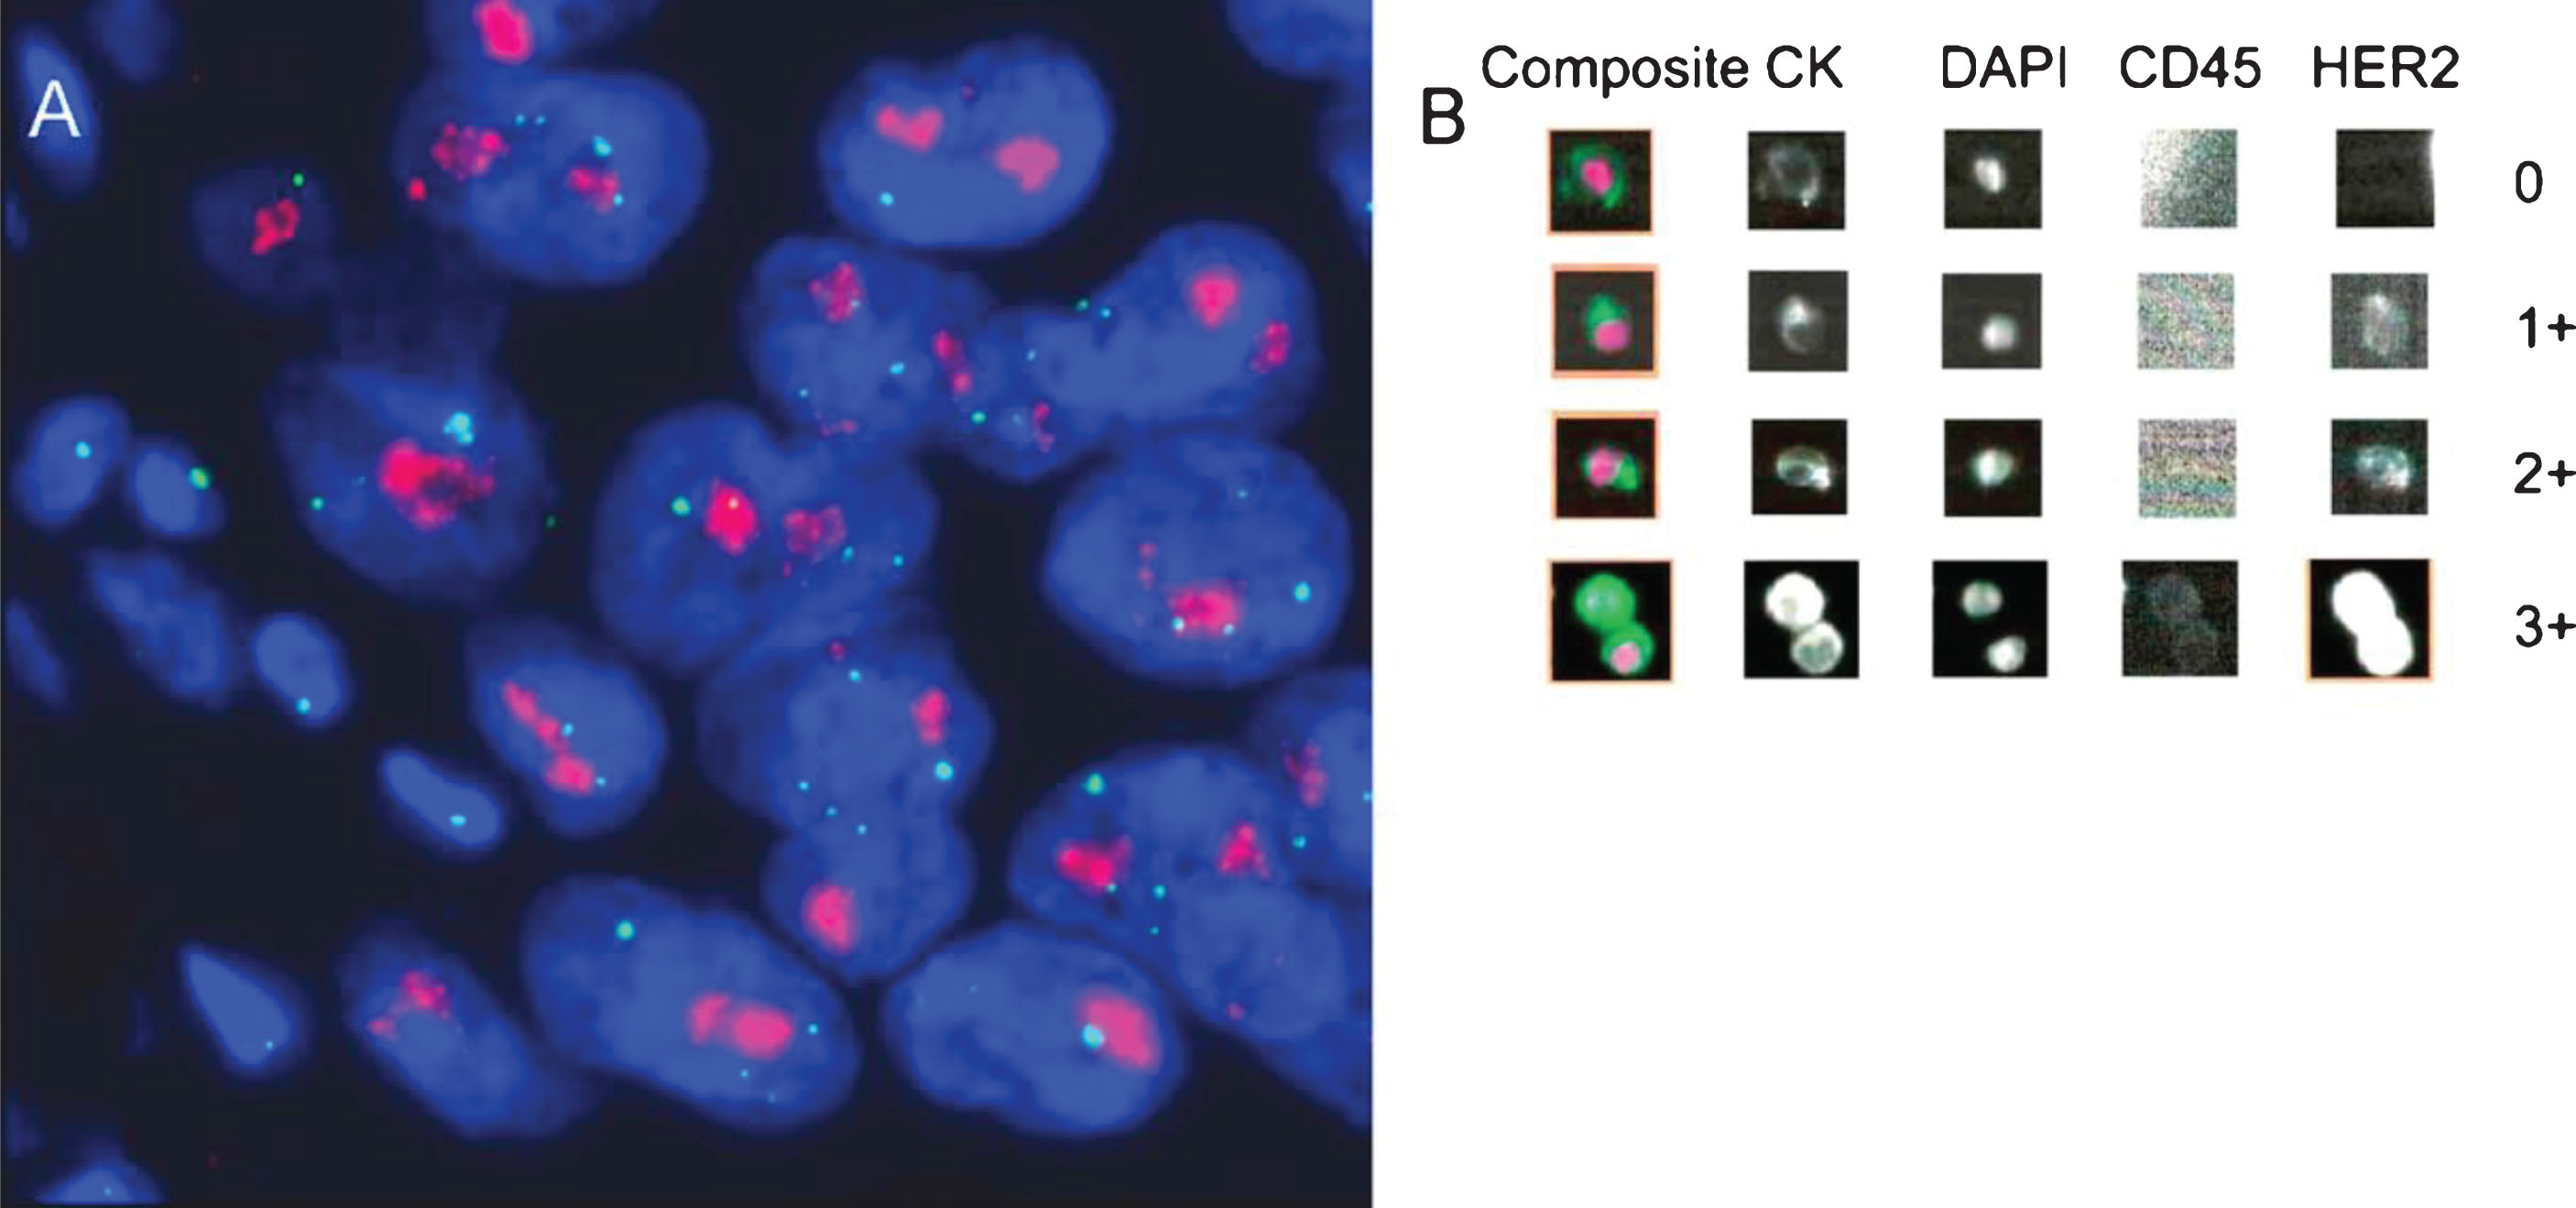 Determination of human epidermal growth factor receptor 2 (HER2) status by (A) fluorescent in situ hybridization and (B) immunofluorescence using the CellSearch CTC assay system. (A) Primary tumor with strong HER2 gene amplification (clusters of HER2 signals: red; CEP17 signals: green); (B) circulating tumor cells detected with the CellSearch system (0: HER2 negative; 1+: weak; 2+: moderate; 3+: strong intensity of HER2-specific immunofluorescence). Reprinted from European Urology, Volume 61, Issue 4, Rink et. al., Prognostic role and HER2 expression of circulating tumor cells in peripheral blood of patients prior to radical cystectomy: a prospective study., Pages 810-817, Copyright (2012), with permission from Elsevier.